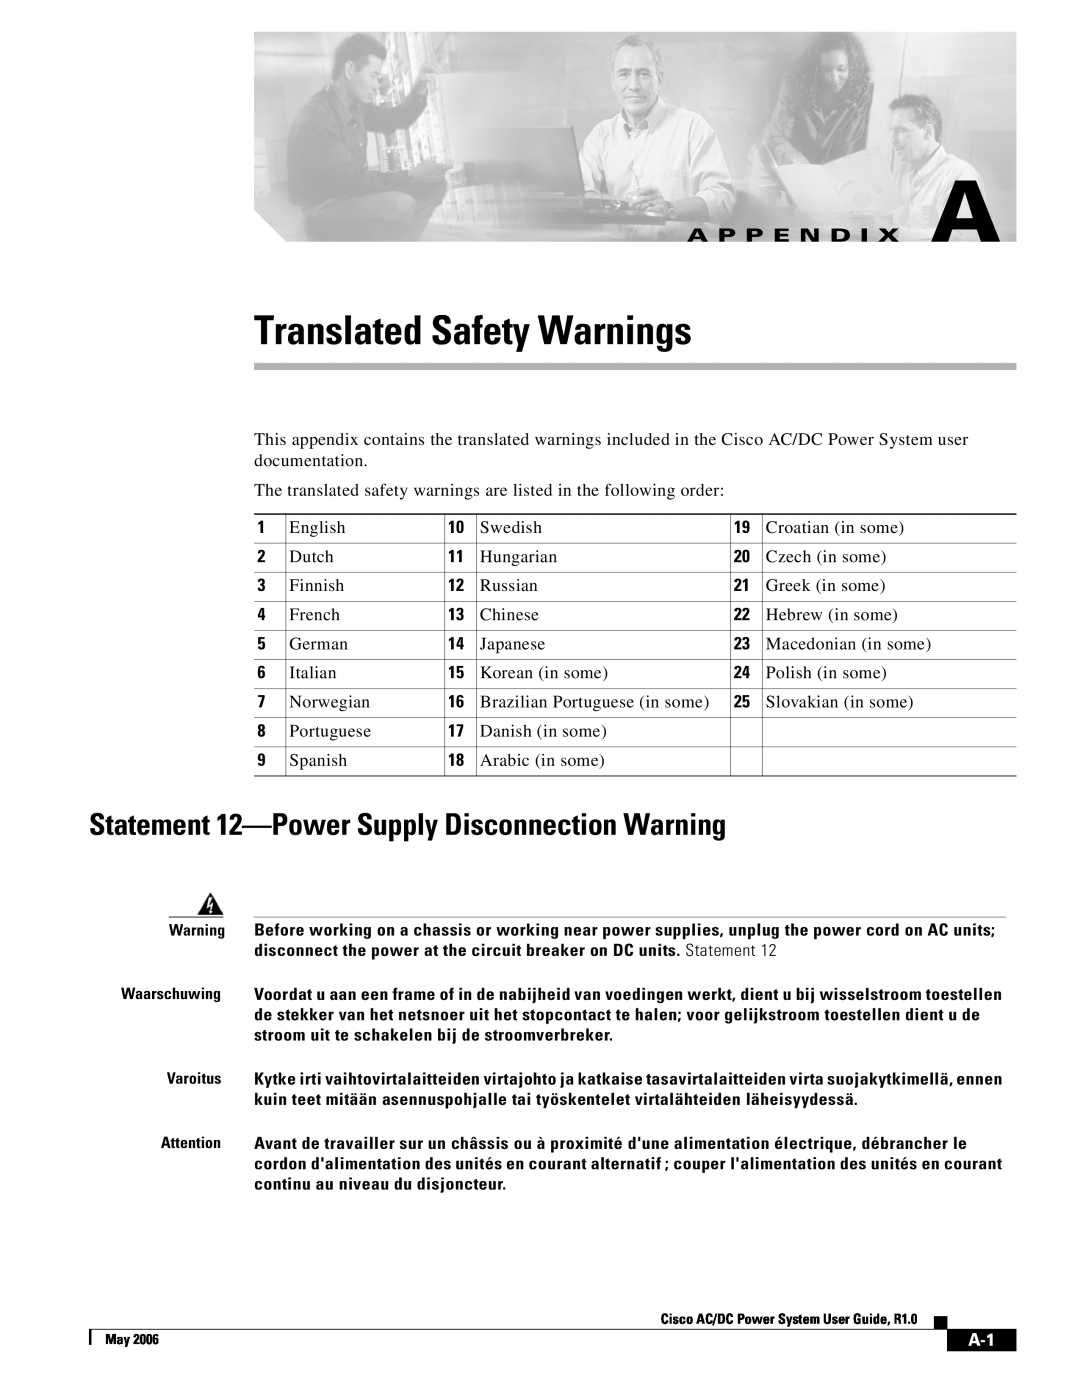 Cisco Systems 124778 manual Translated Safety Warnings, Statement 12-Power Supply Disconnection Warning, A P P E N D I X A 